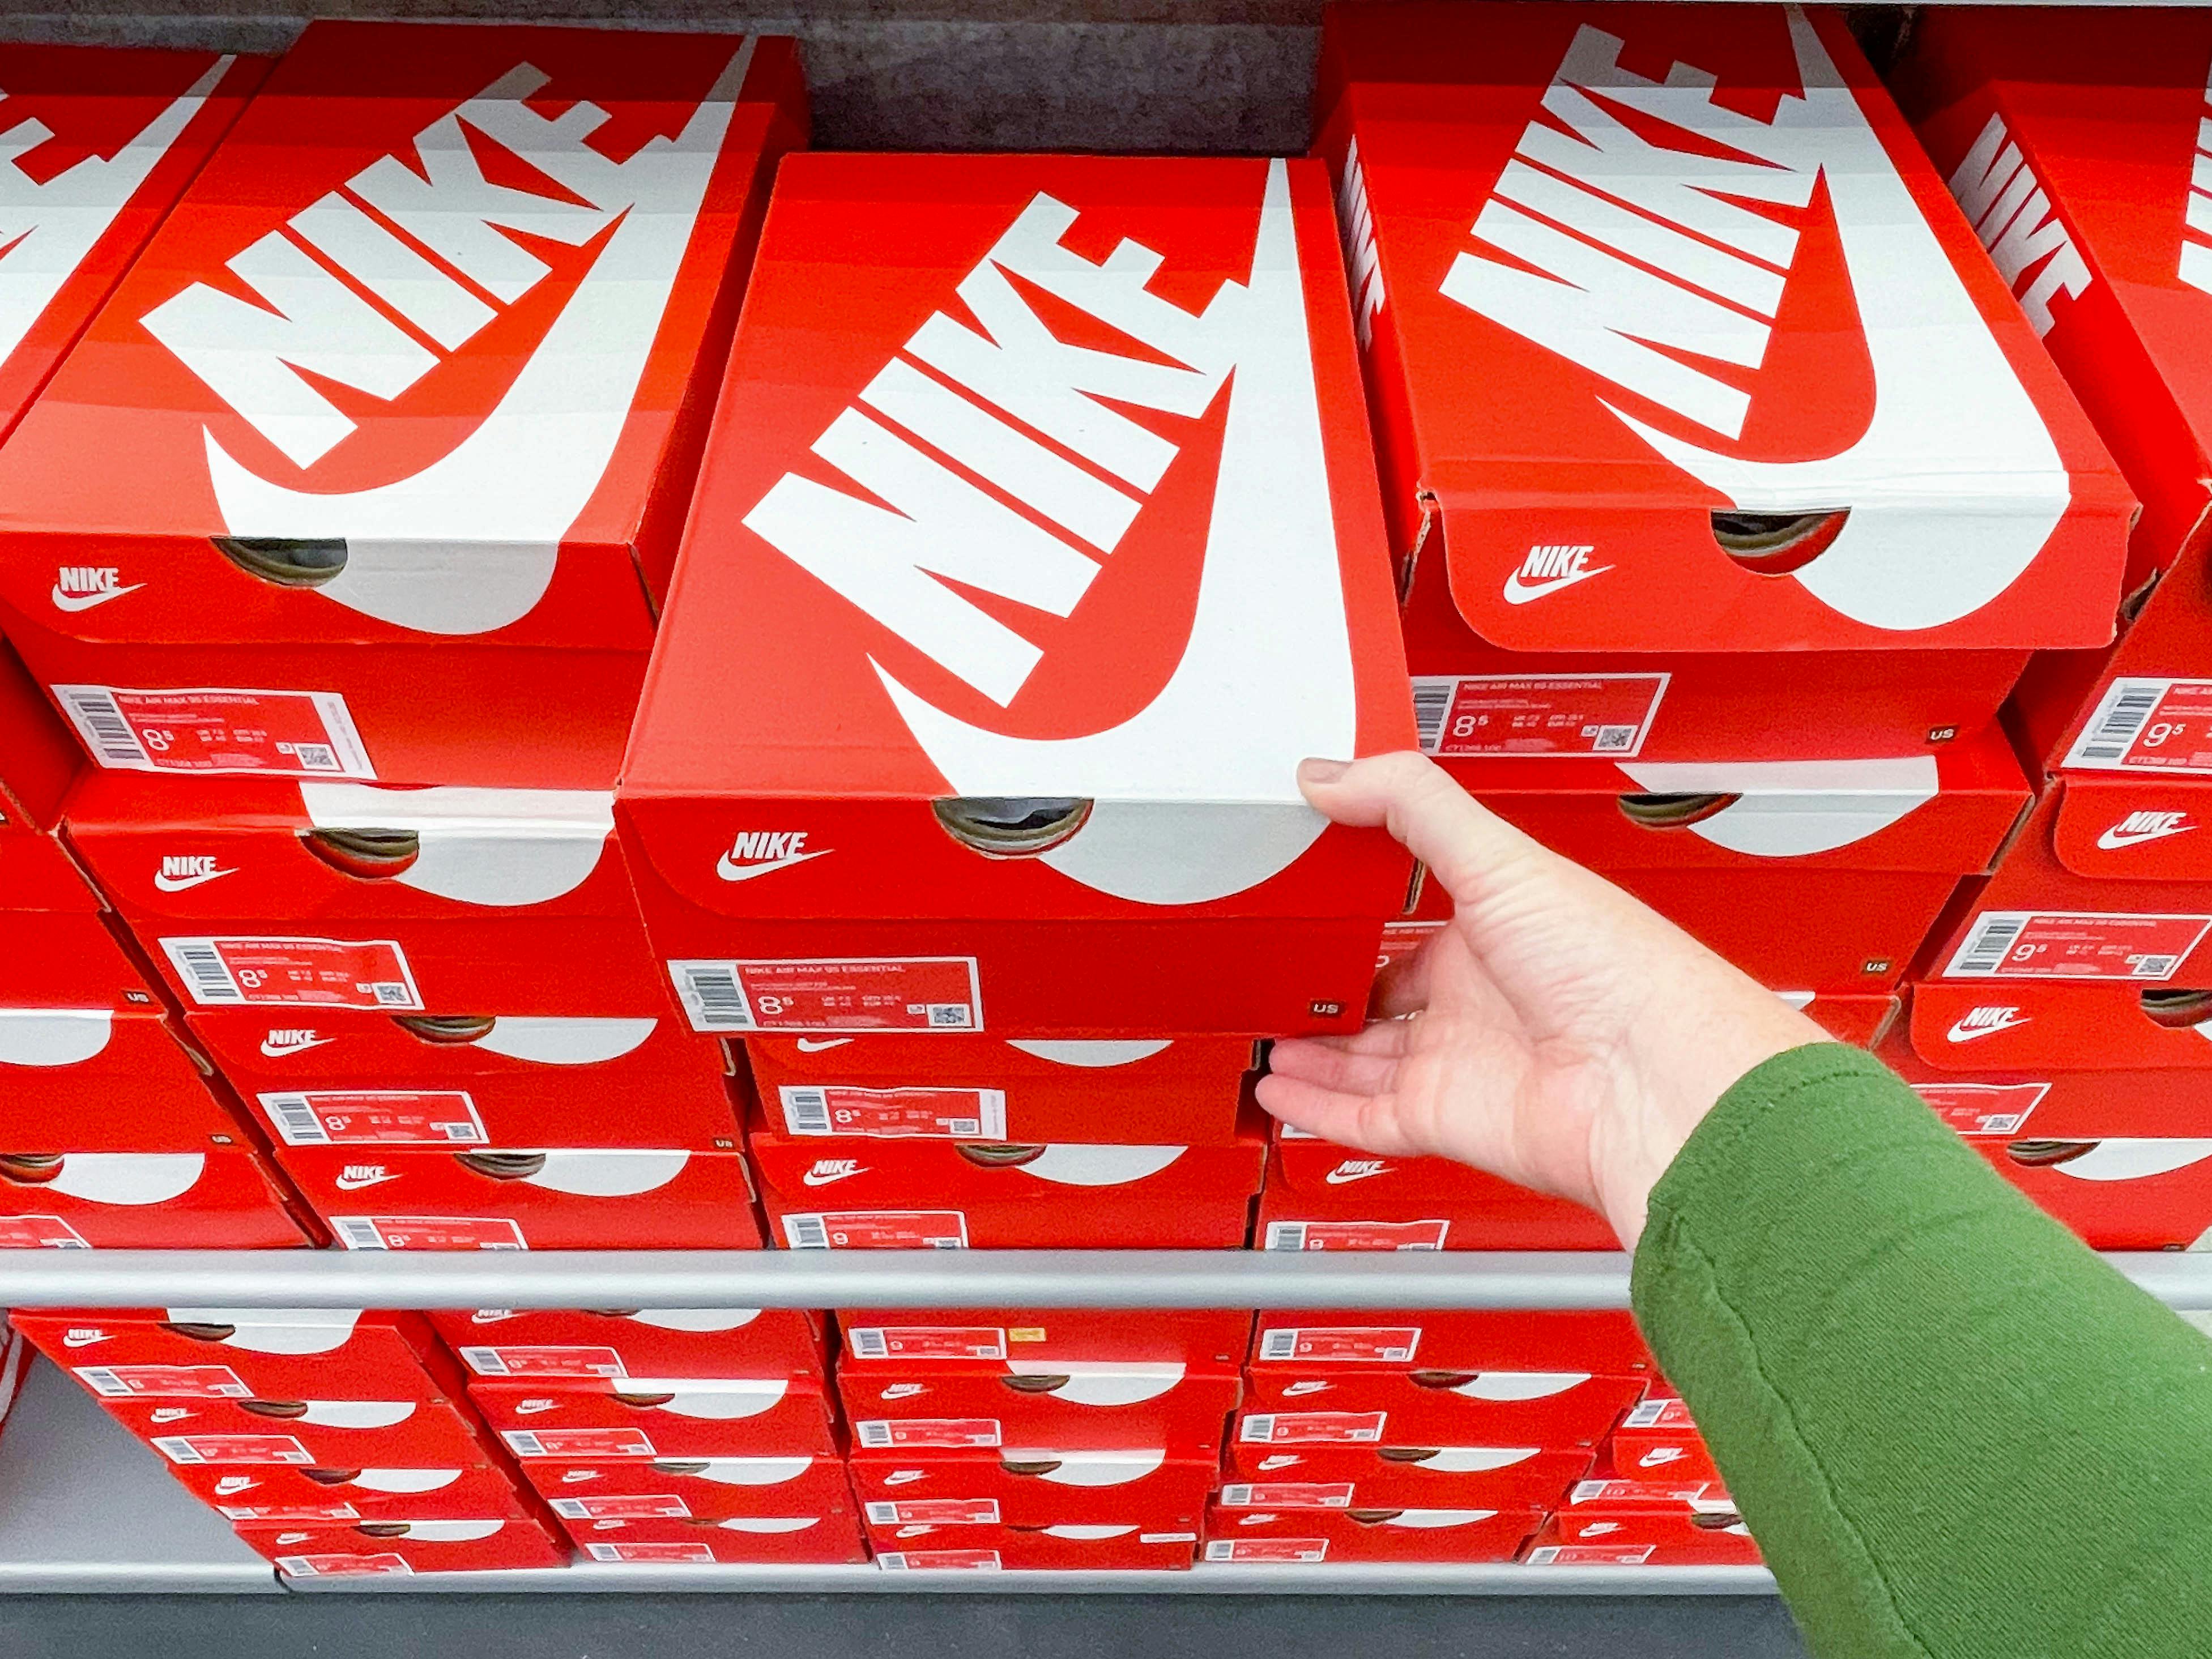 A person's hand taking a box of Nike shoes from a shelf.